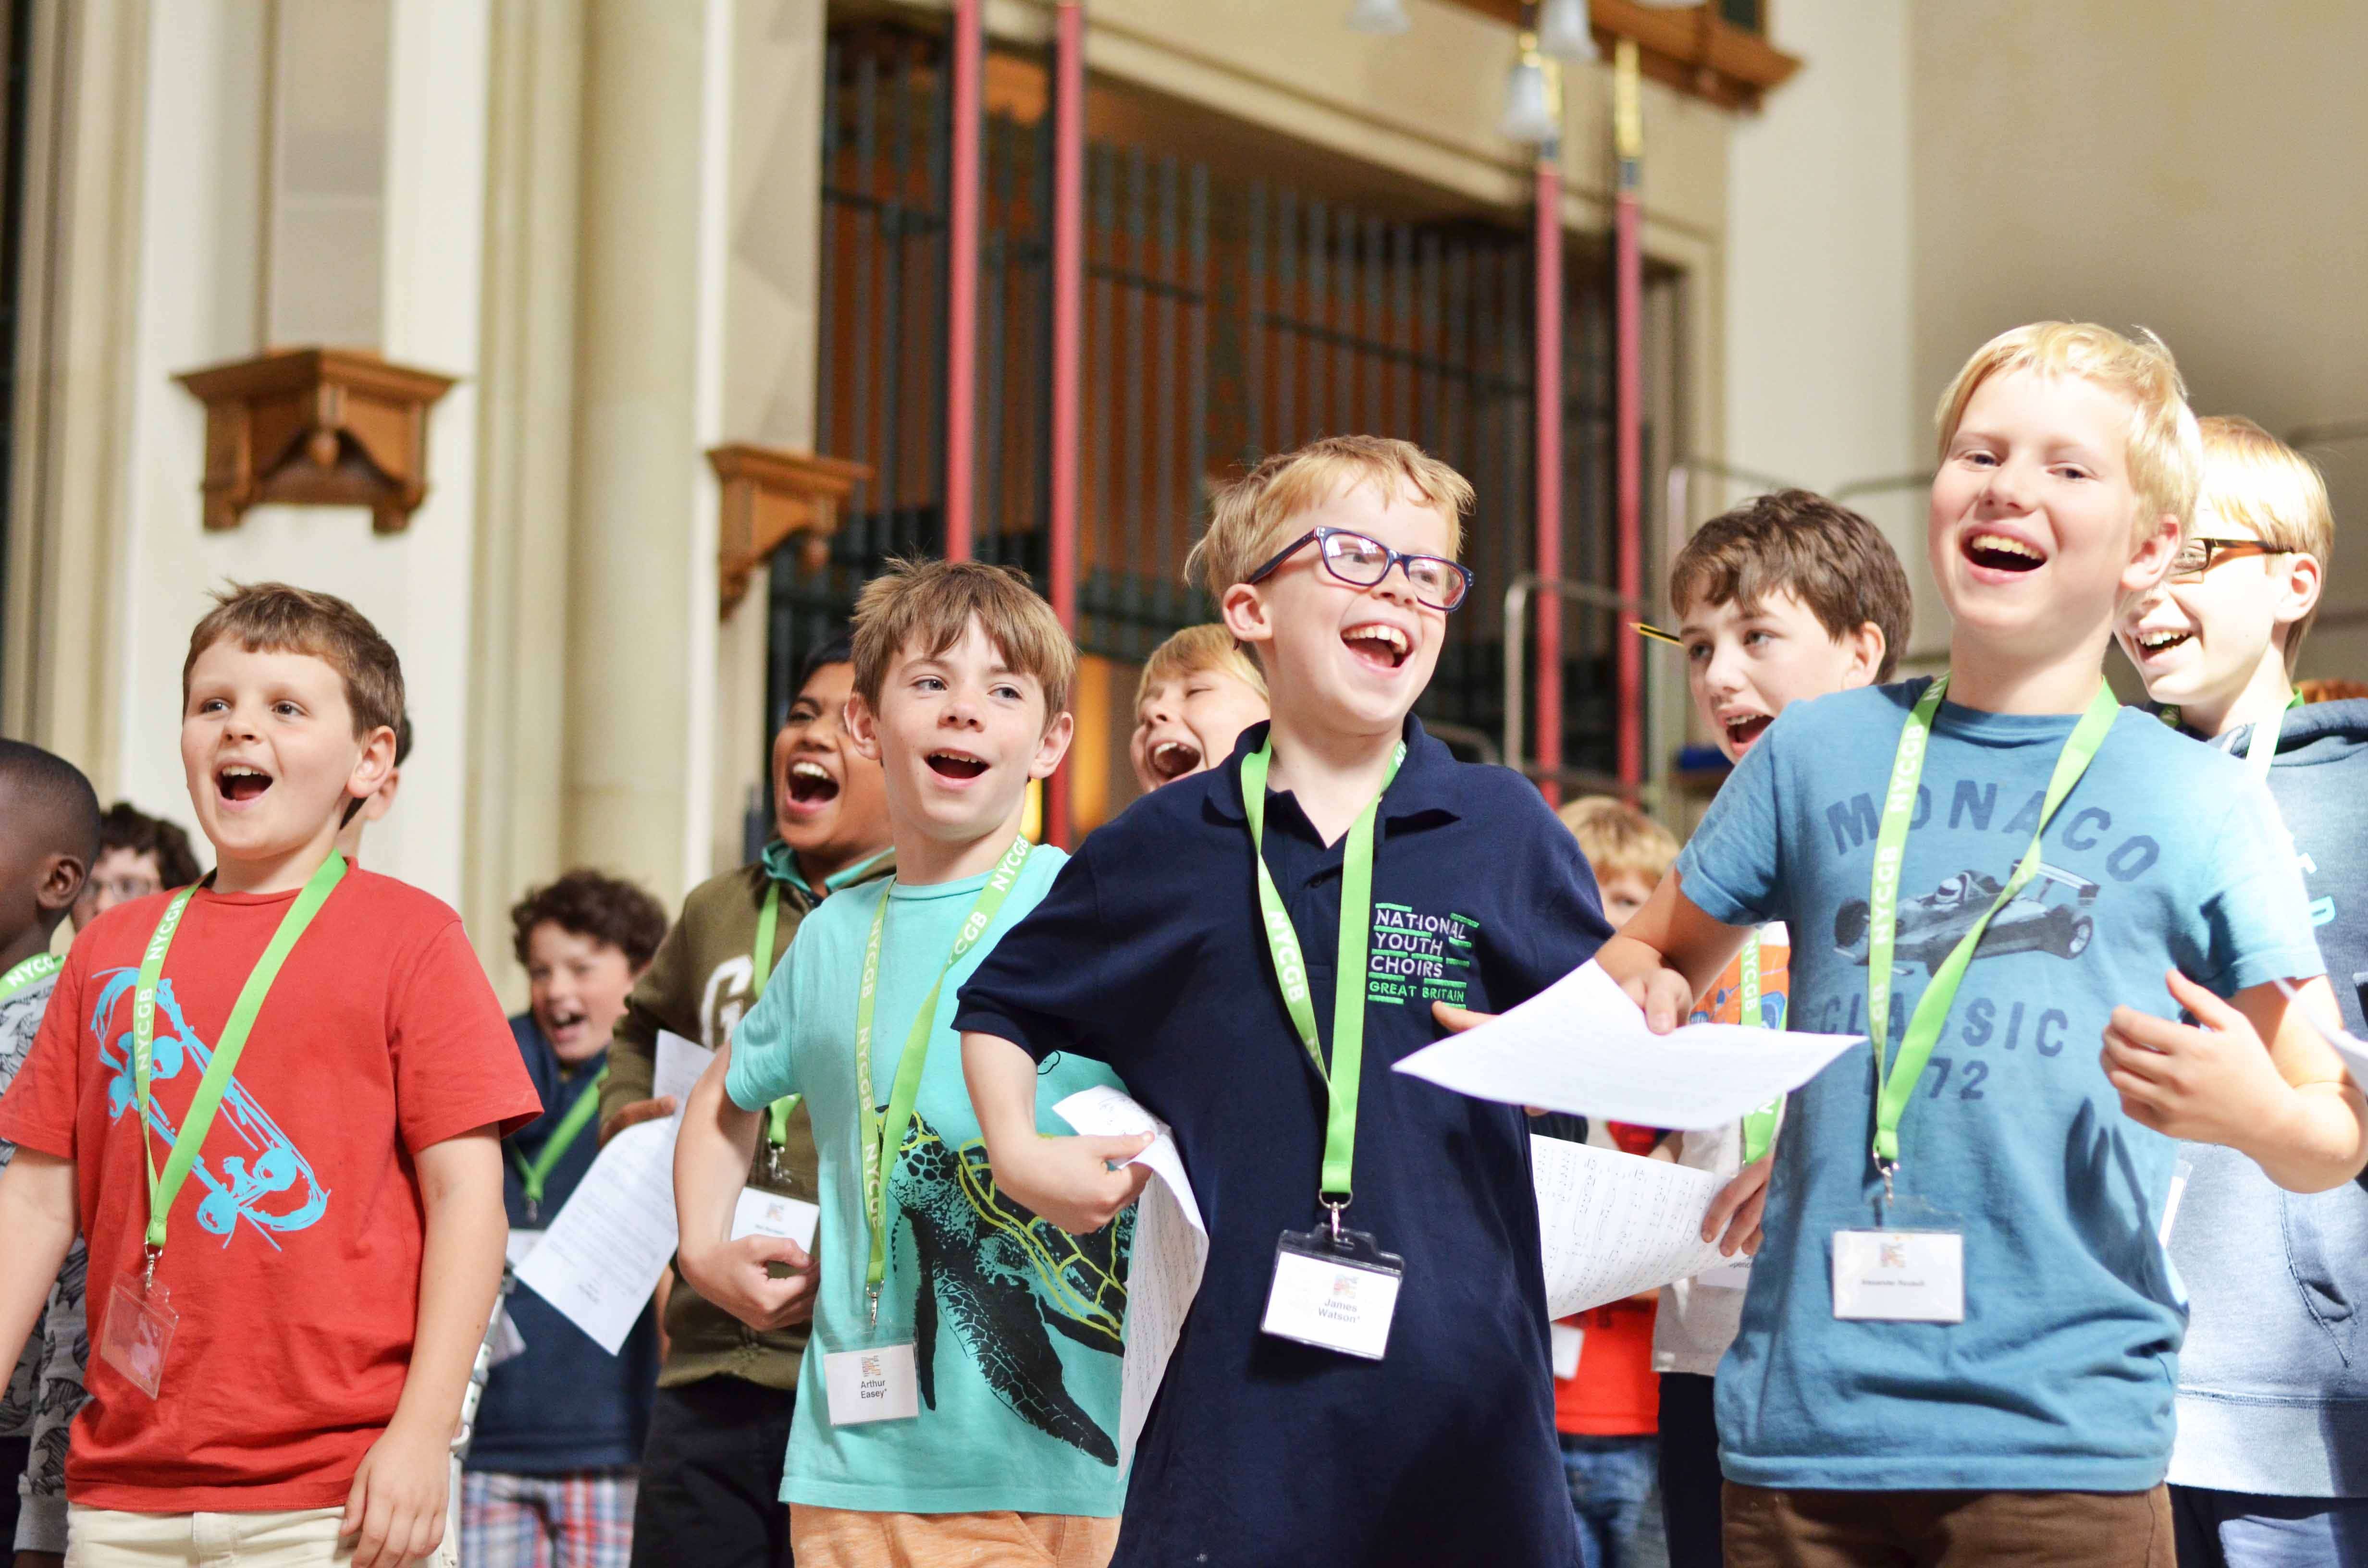 NYCGB: The Open Fund for Organisations